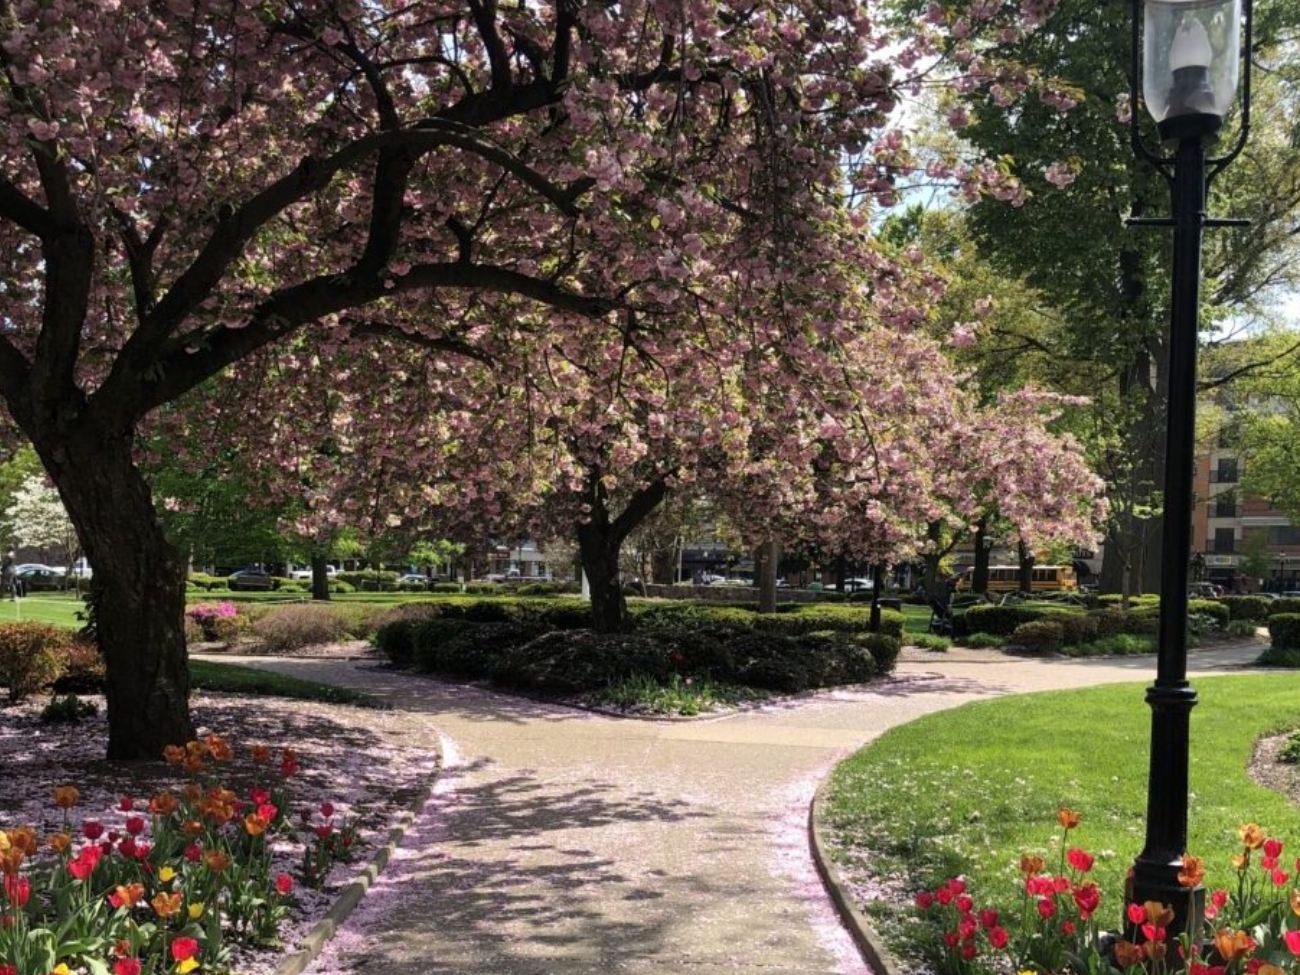 A garden path with flowering trees